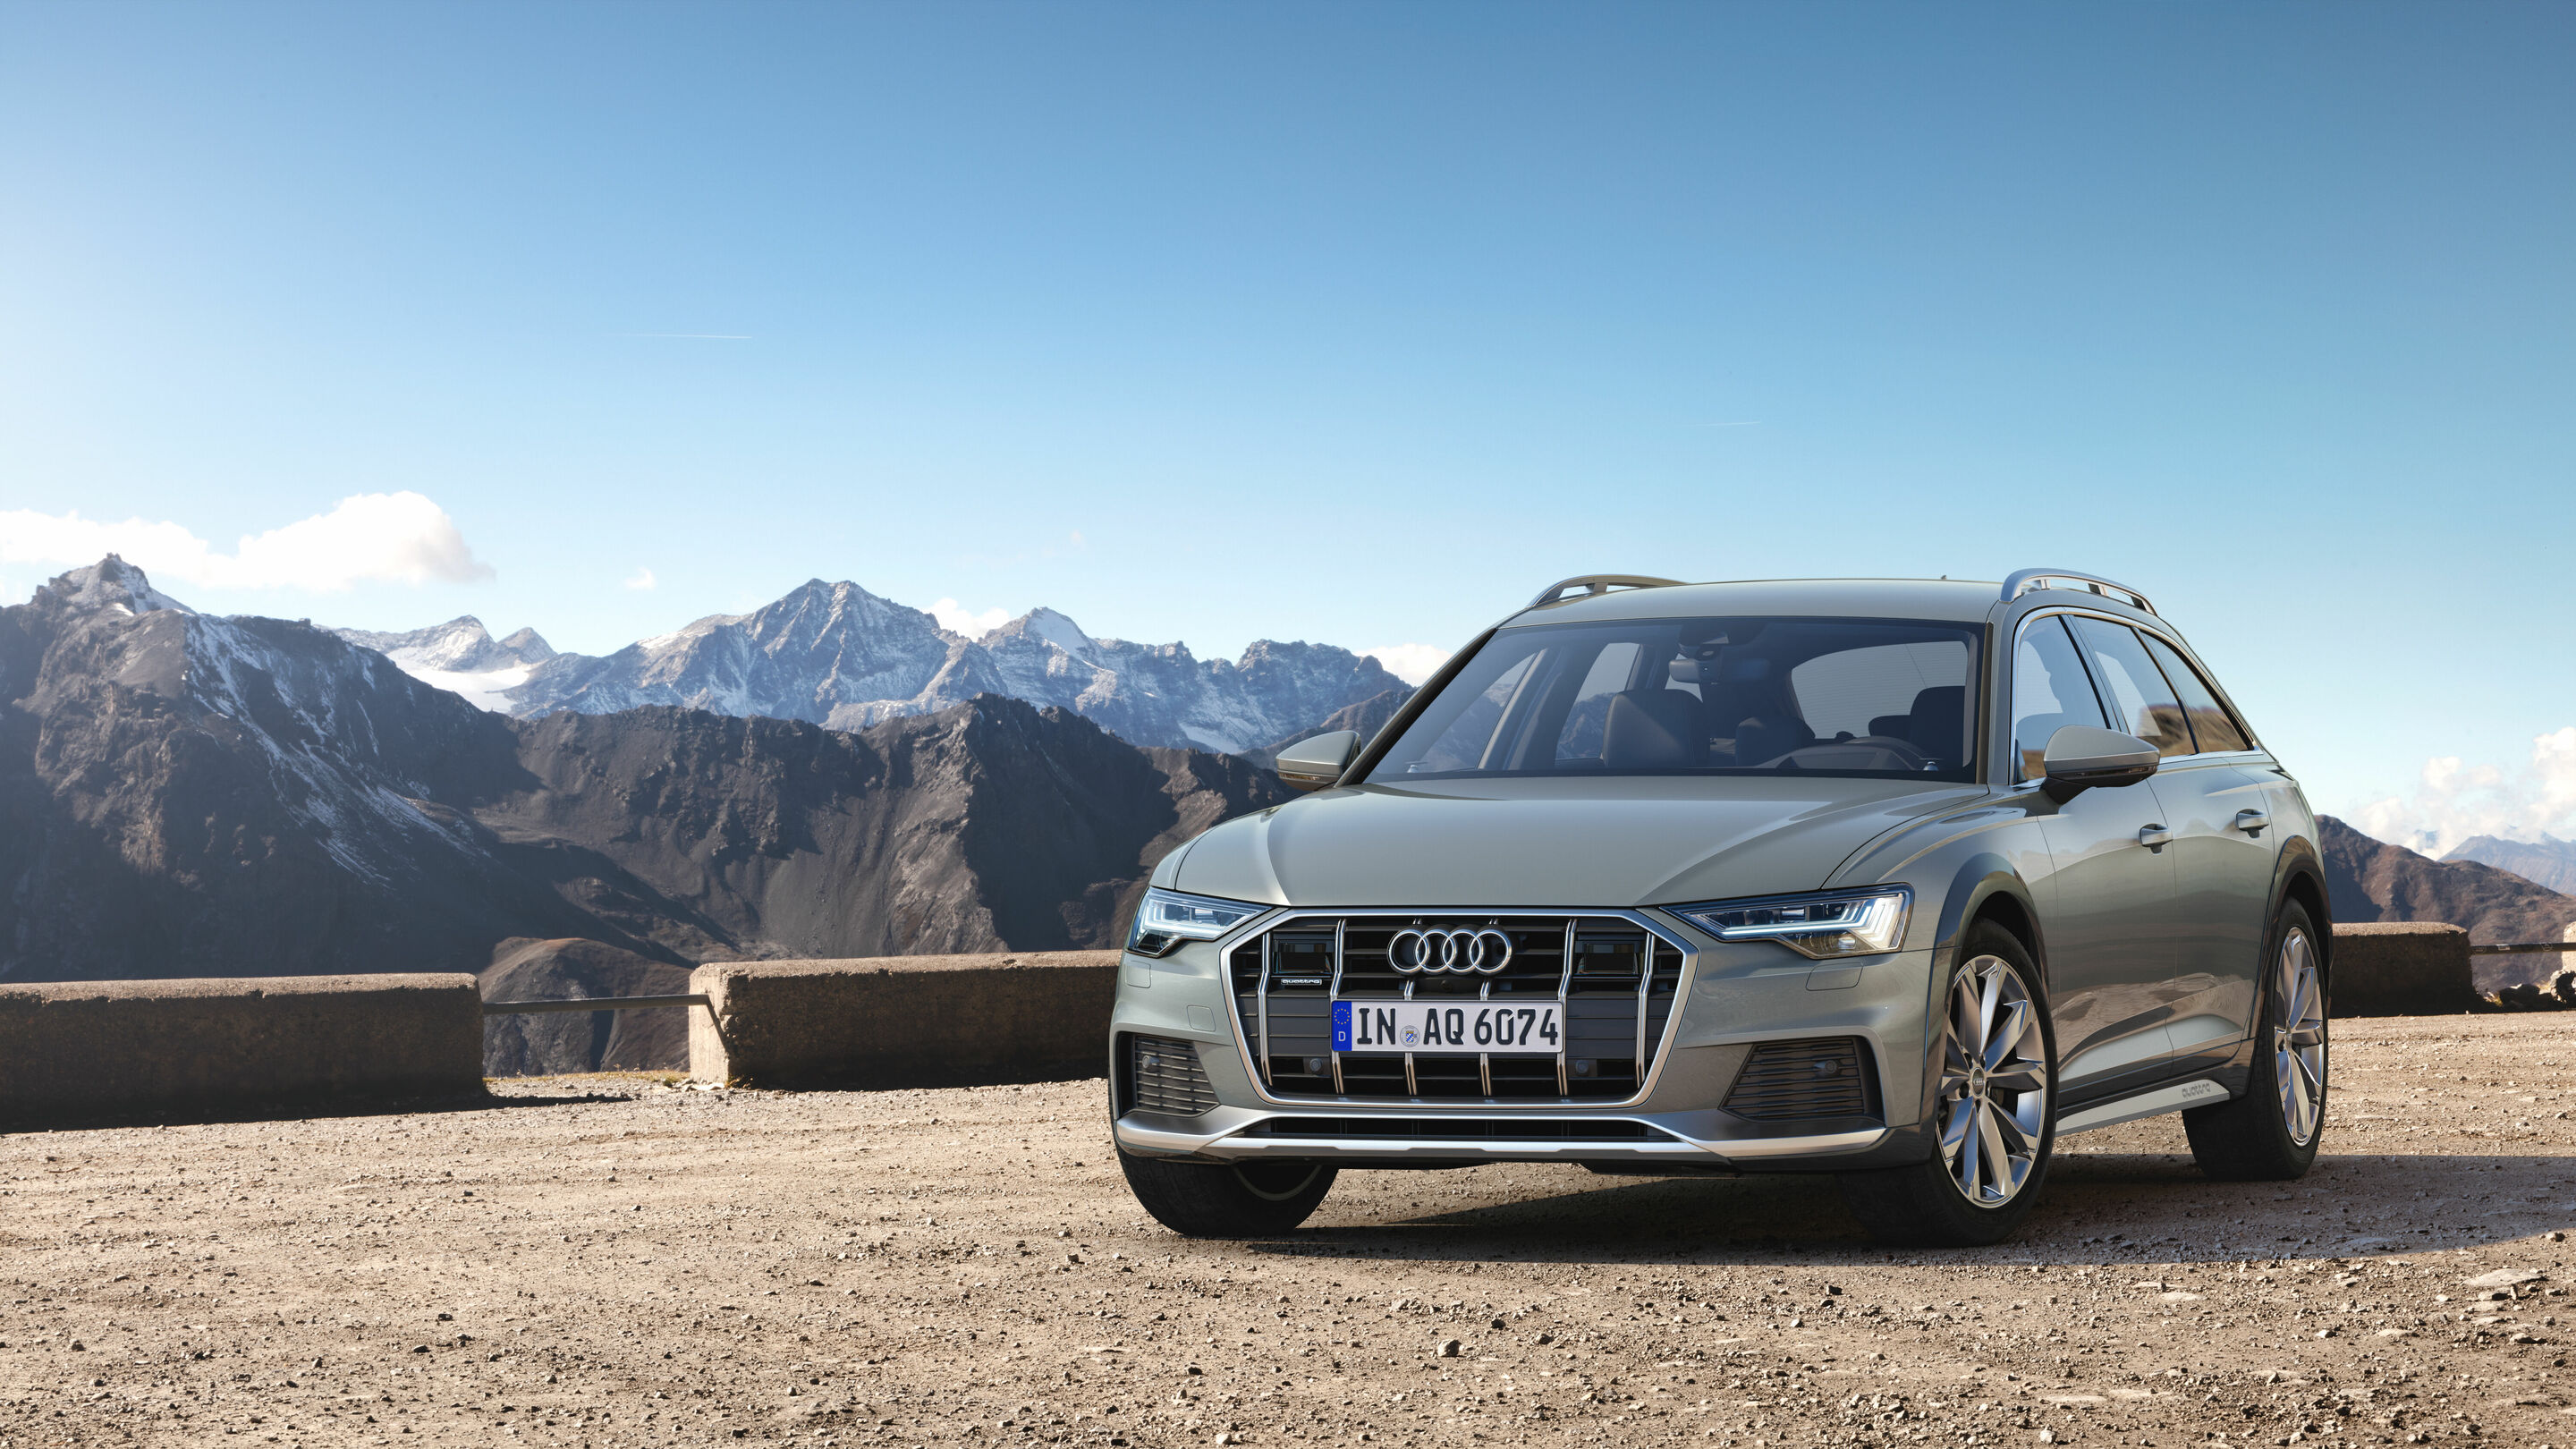 20 years of A6 Avant with offroad qualities: the new Audi A6